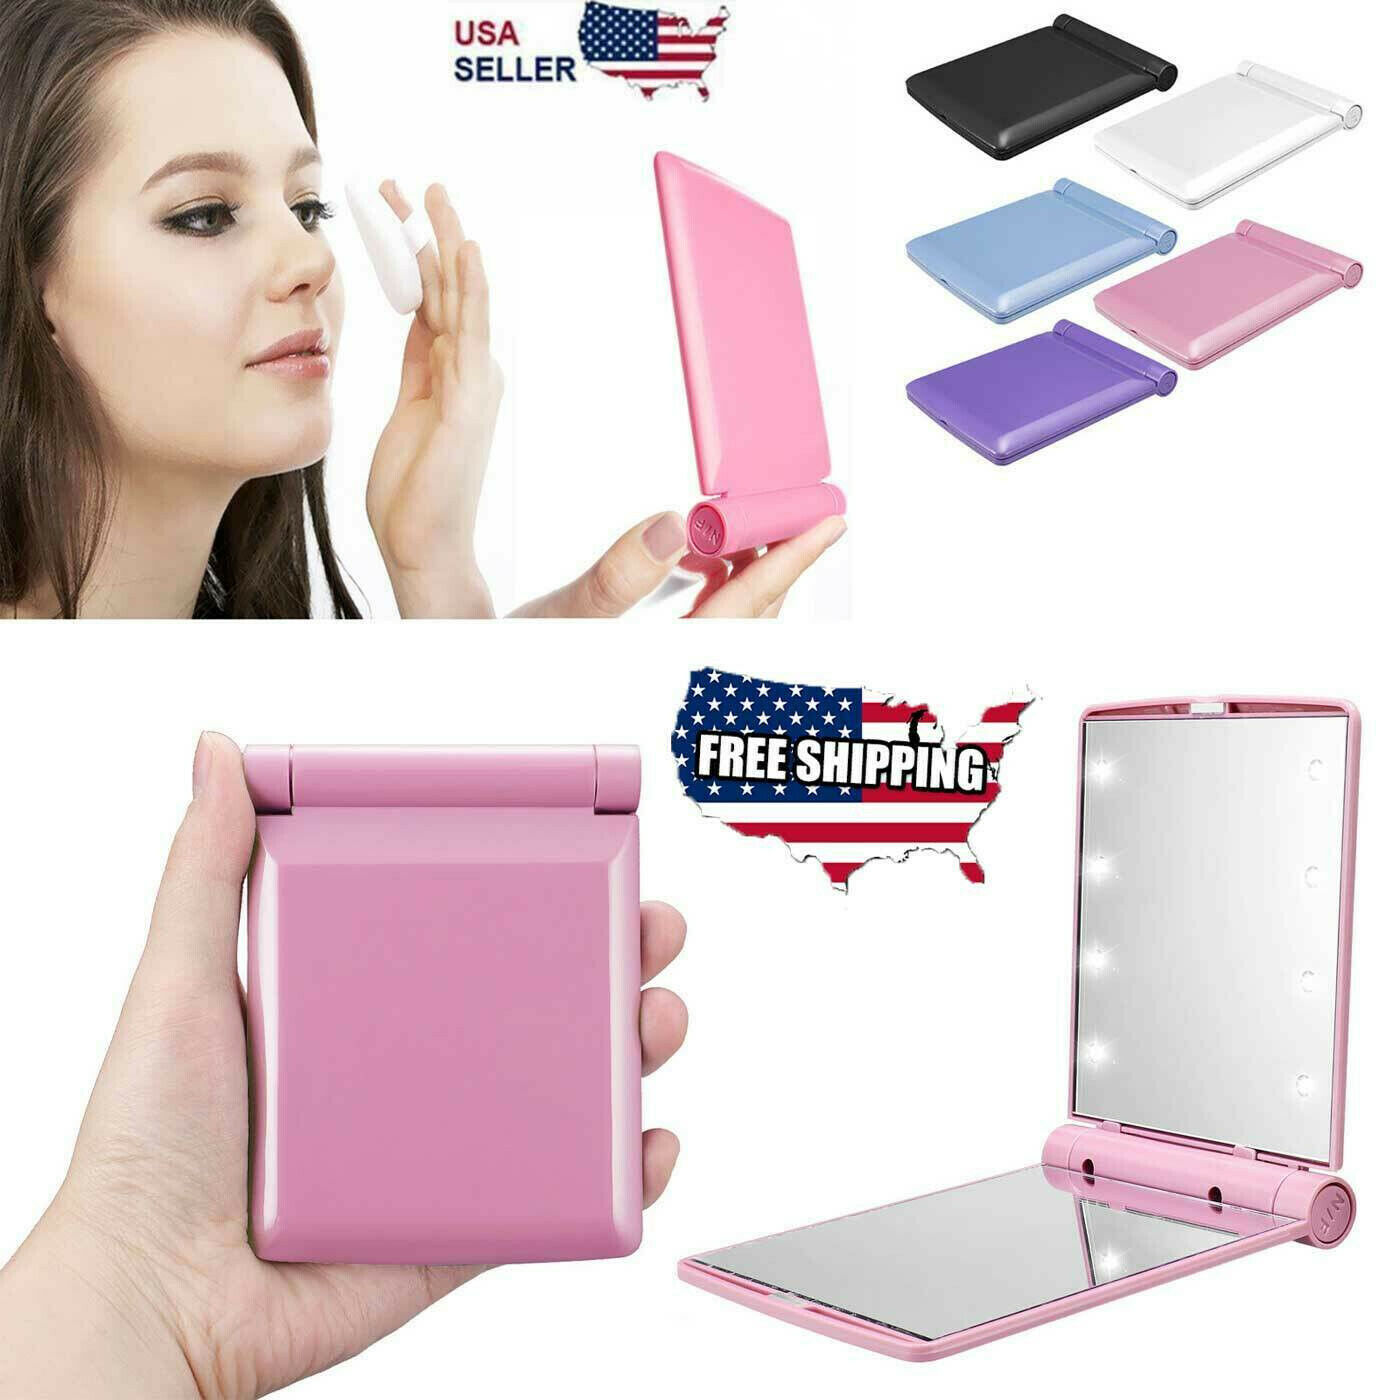 Makeup Mirror Compact Cosmetic Folding Portable Pocket With 8 Led Lights Lamps